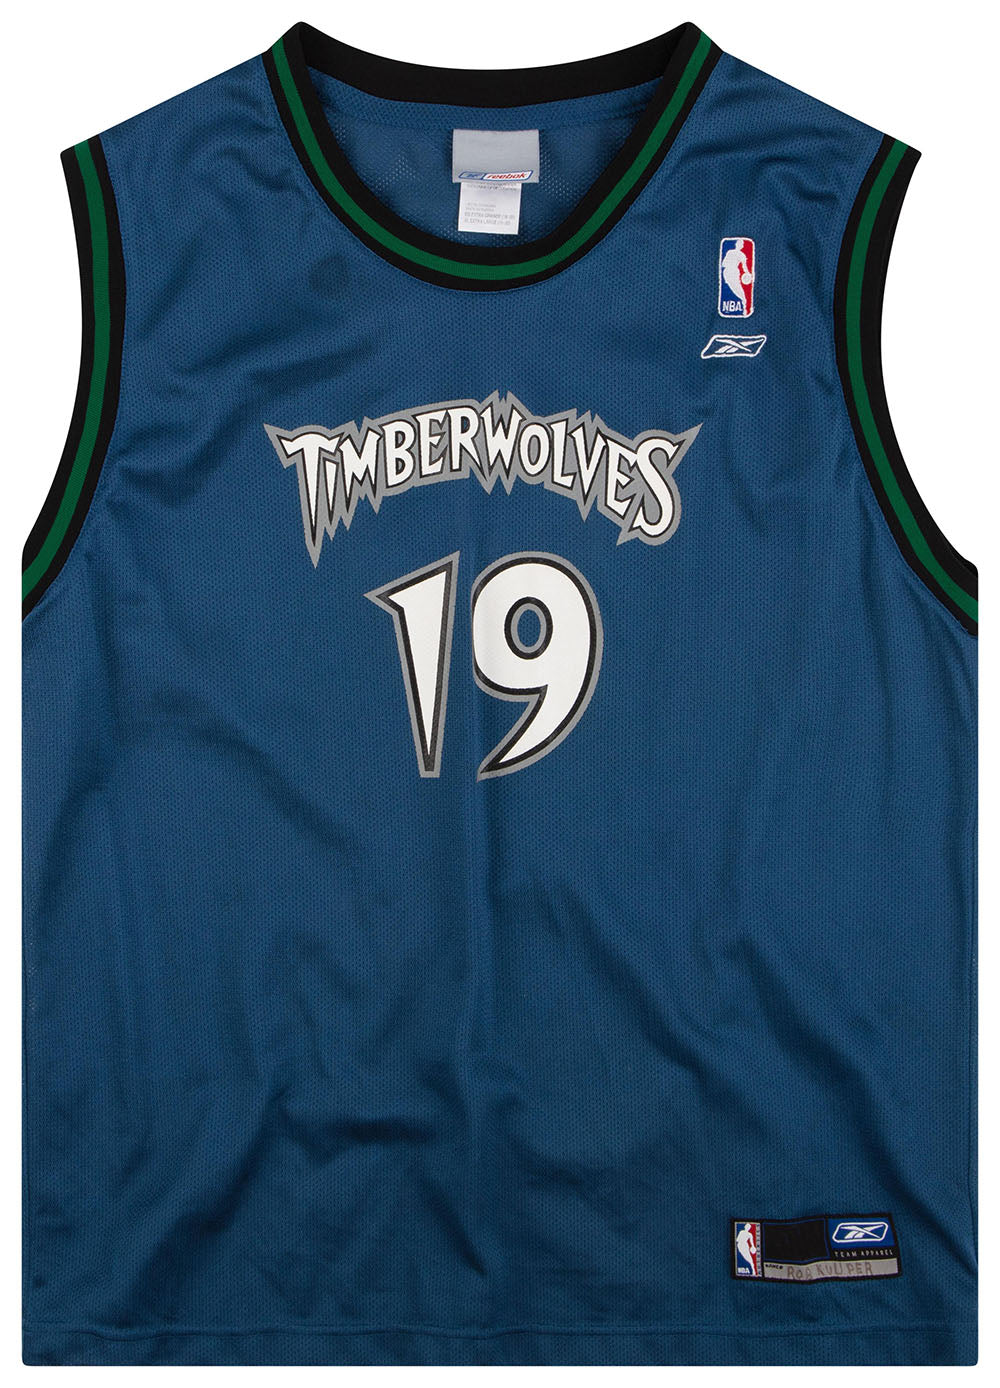 Minnesota Timberwolves #19 Sam Cassell Blue Swingman Jersey Short Suits on  sale,for Cheap,wholesale from China